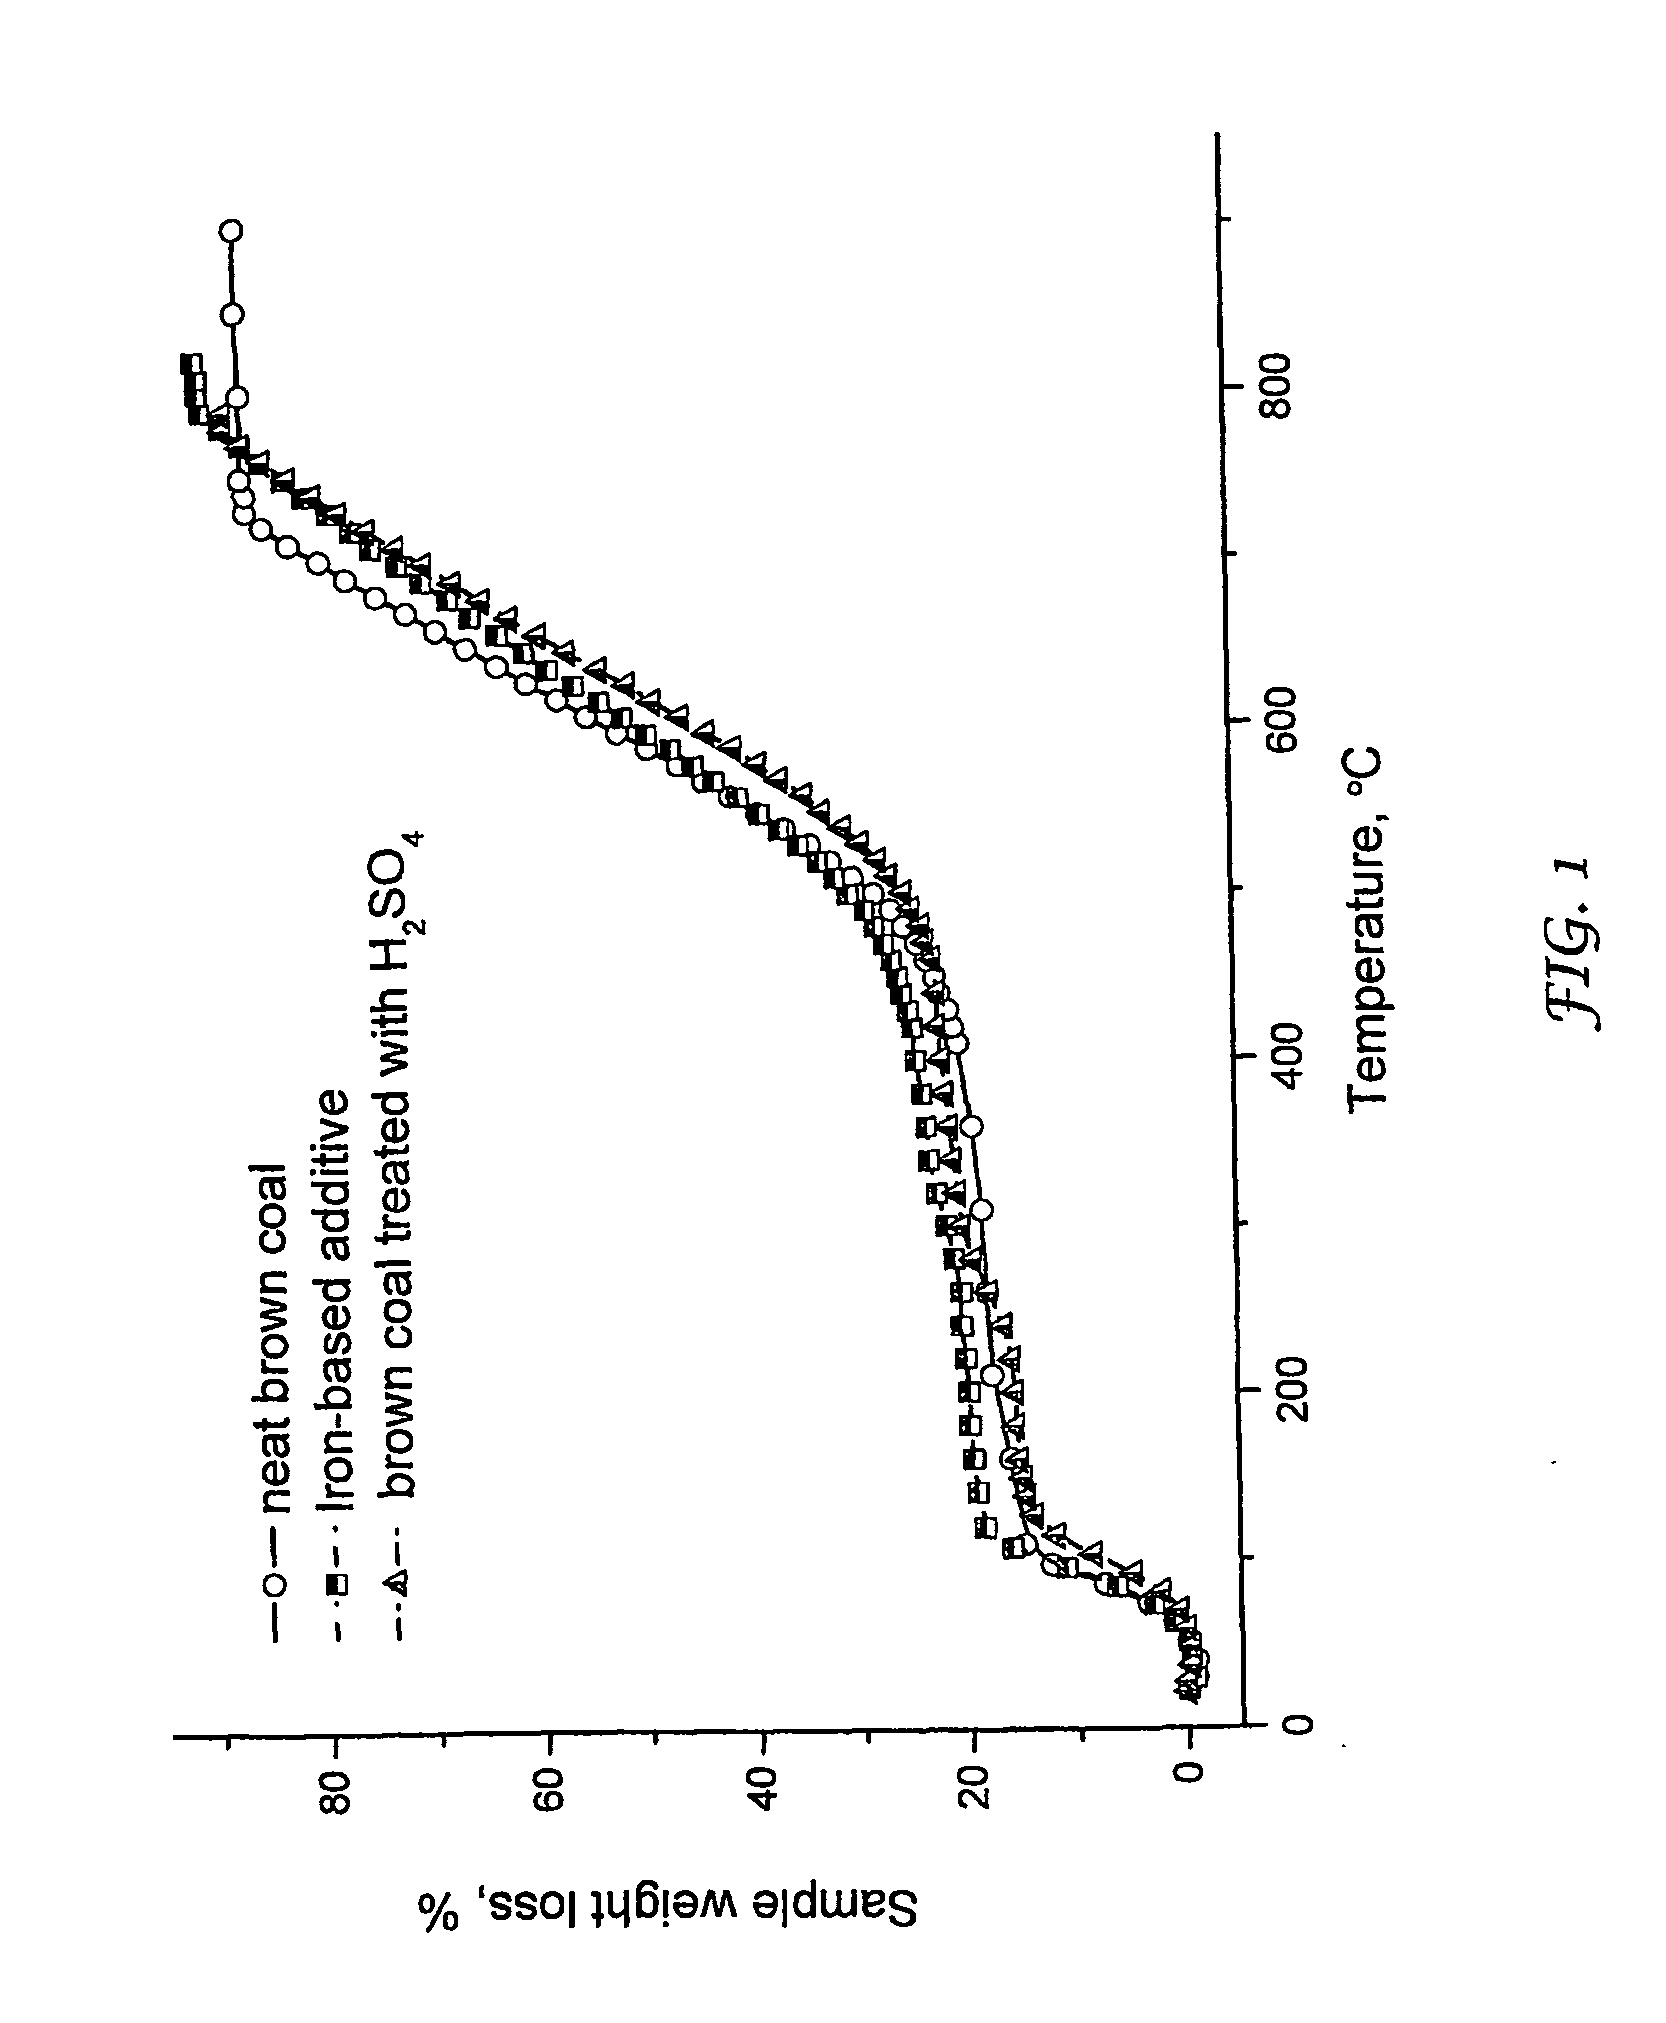 Coal with improved combustion properties